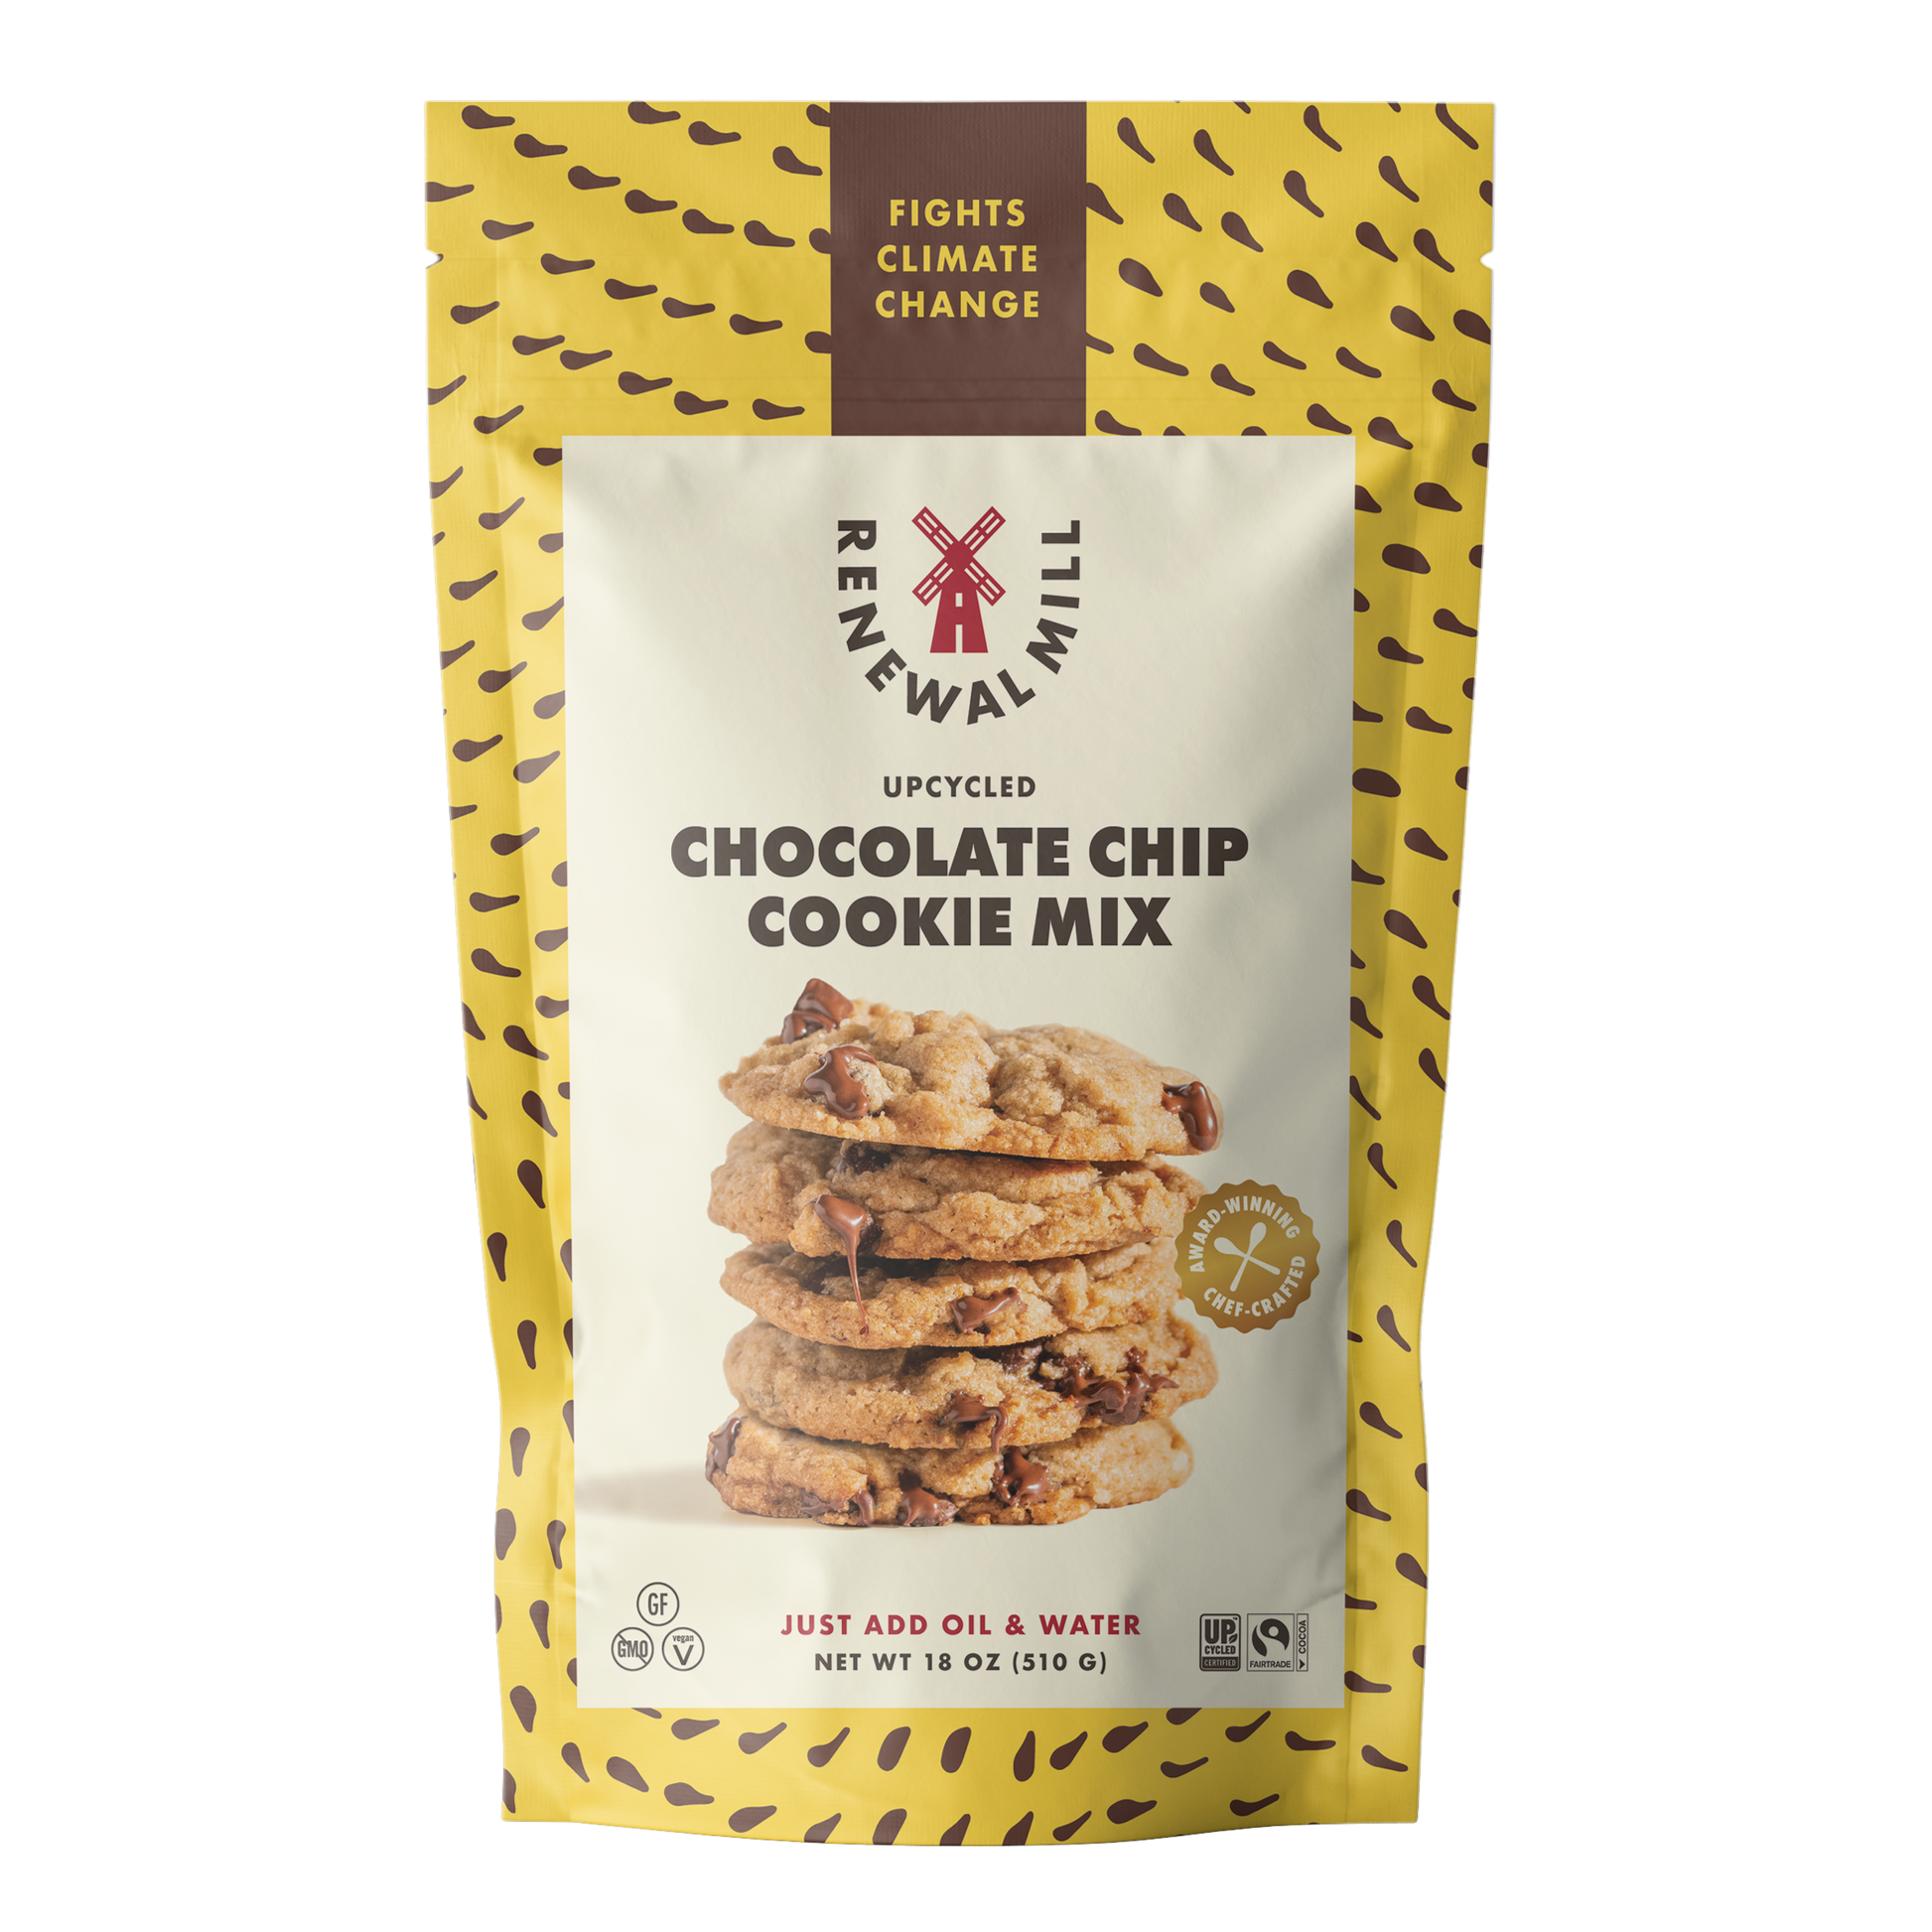 Classic Cookie, Oat Meal Raisin, Soft Baked 3 oz, Shop